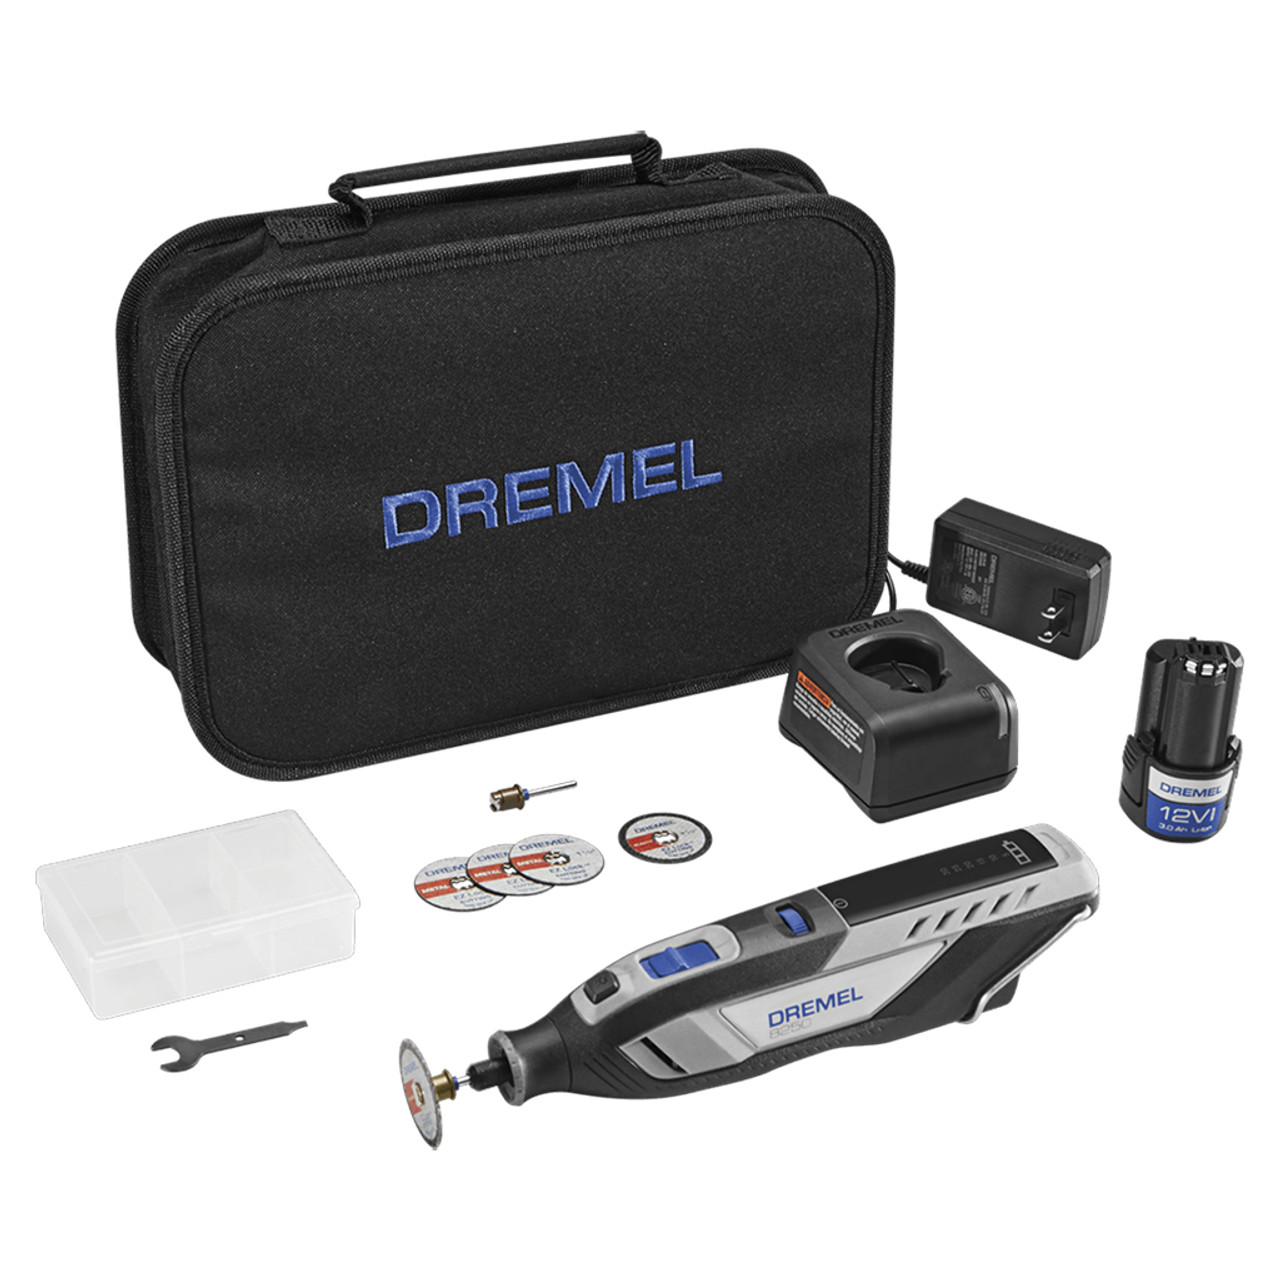 Dremel Rotary Tool Flex-shaft Attachment - Midwest Technology Products